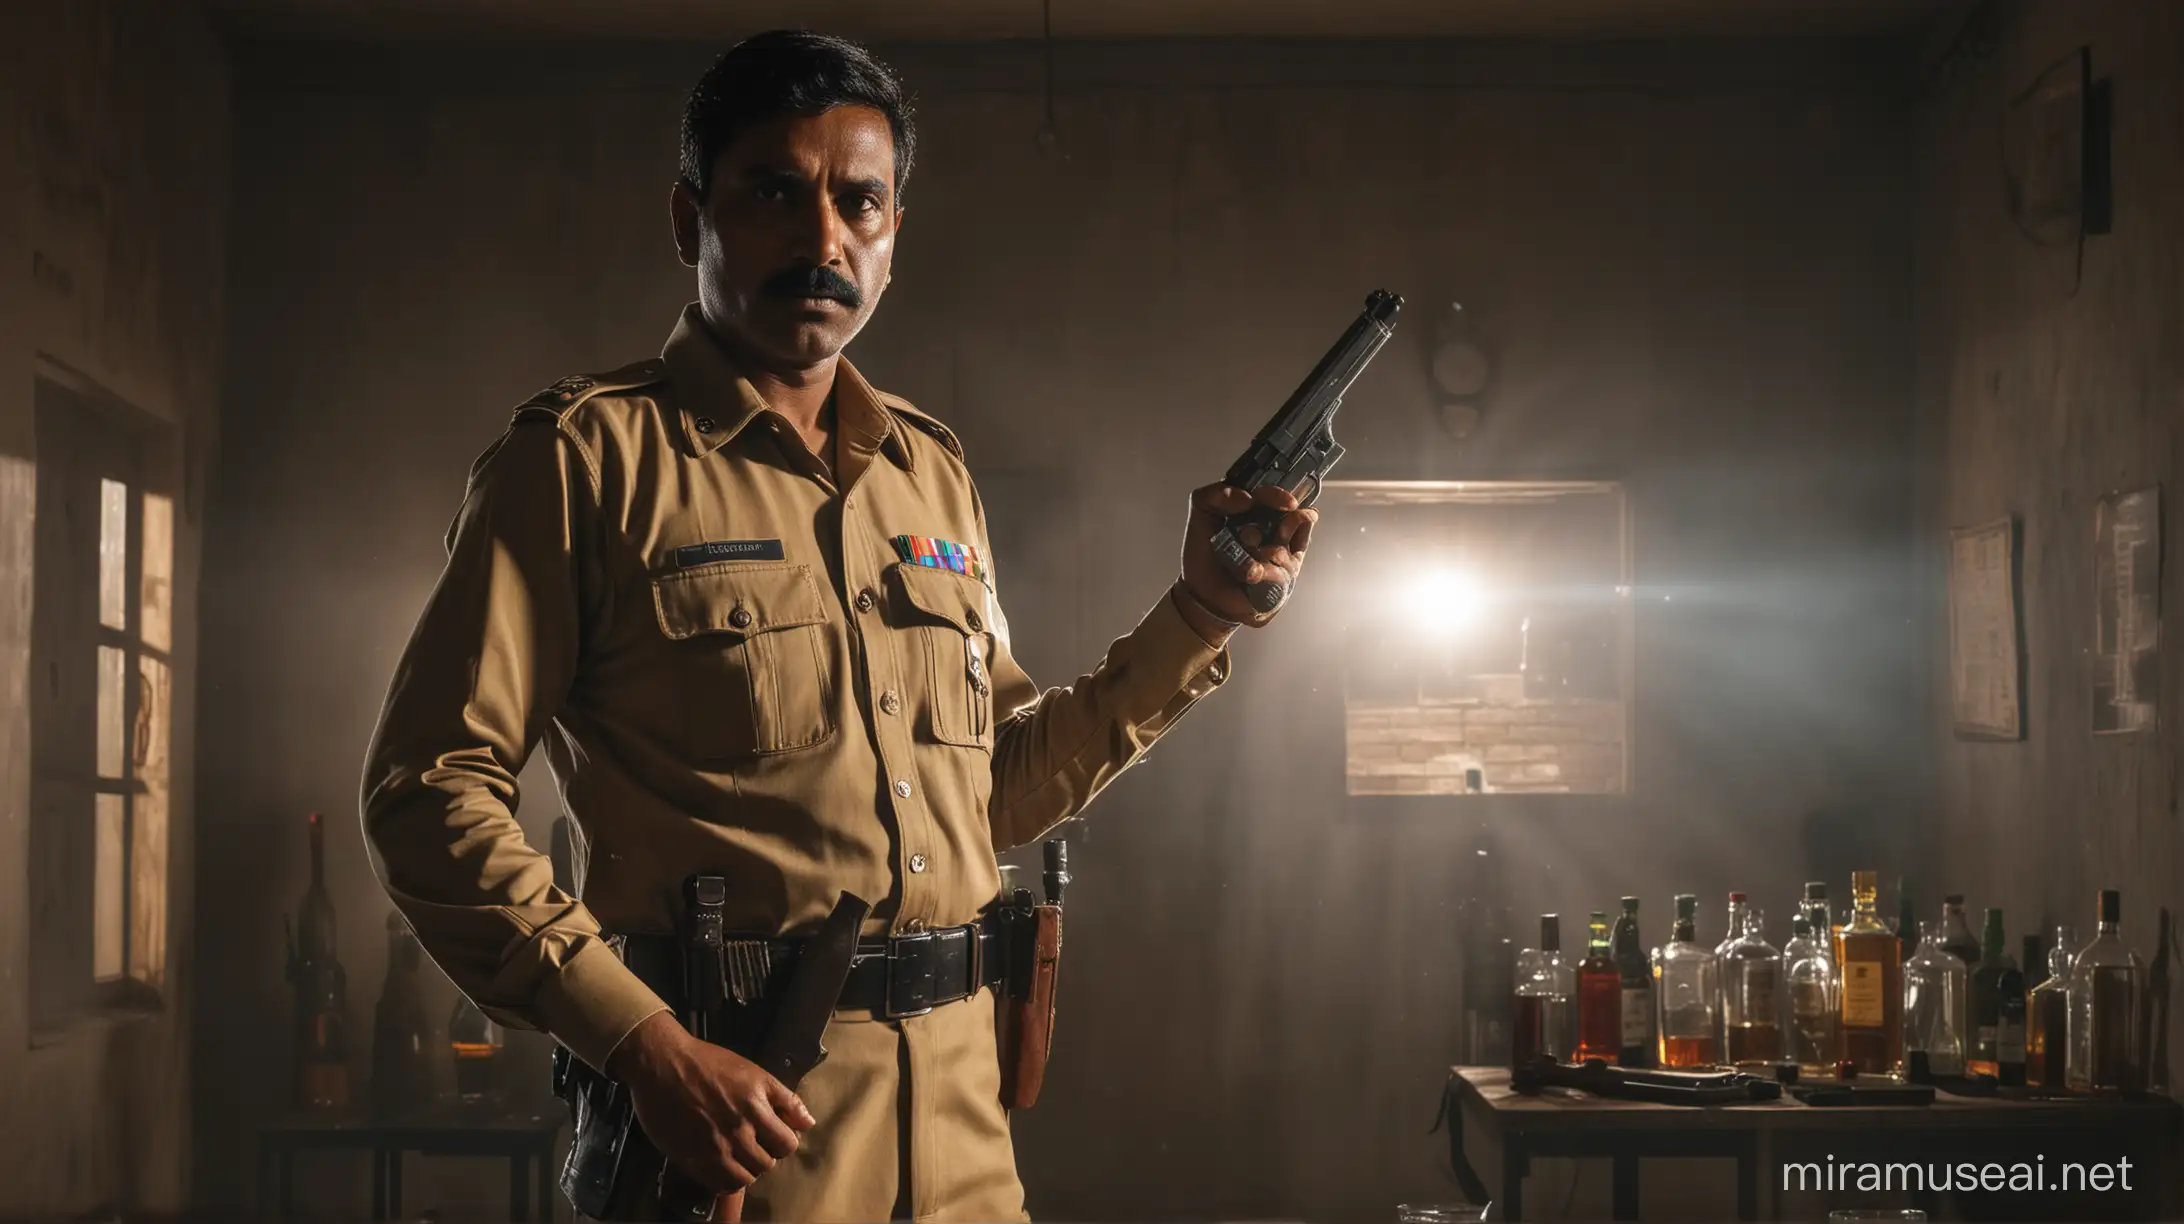 image of Indian police man in khakee dress, guns in hand, liquor bottles in background, dark room, shot from behind, backlight, 